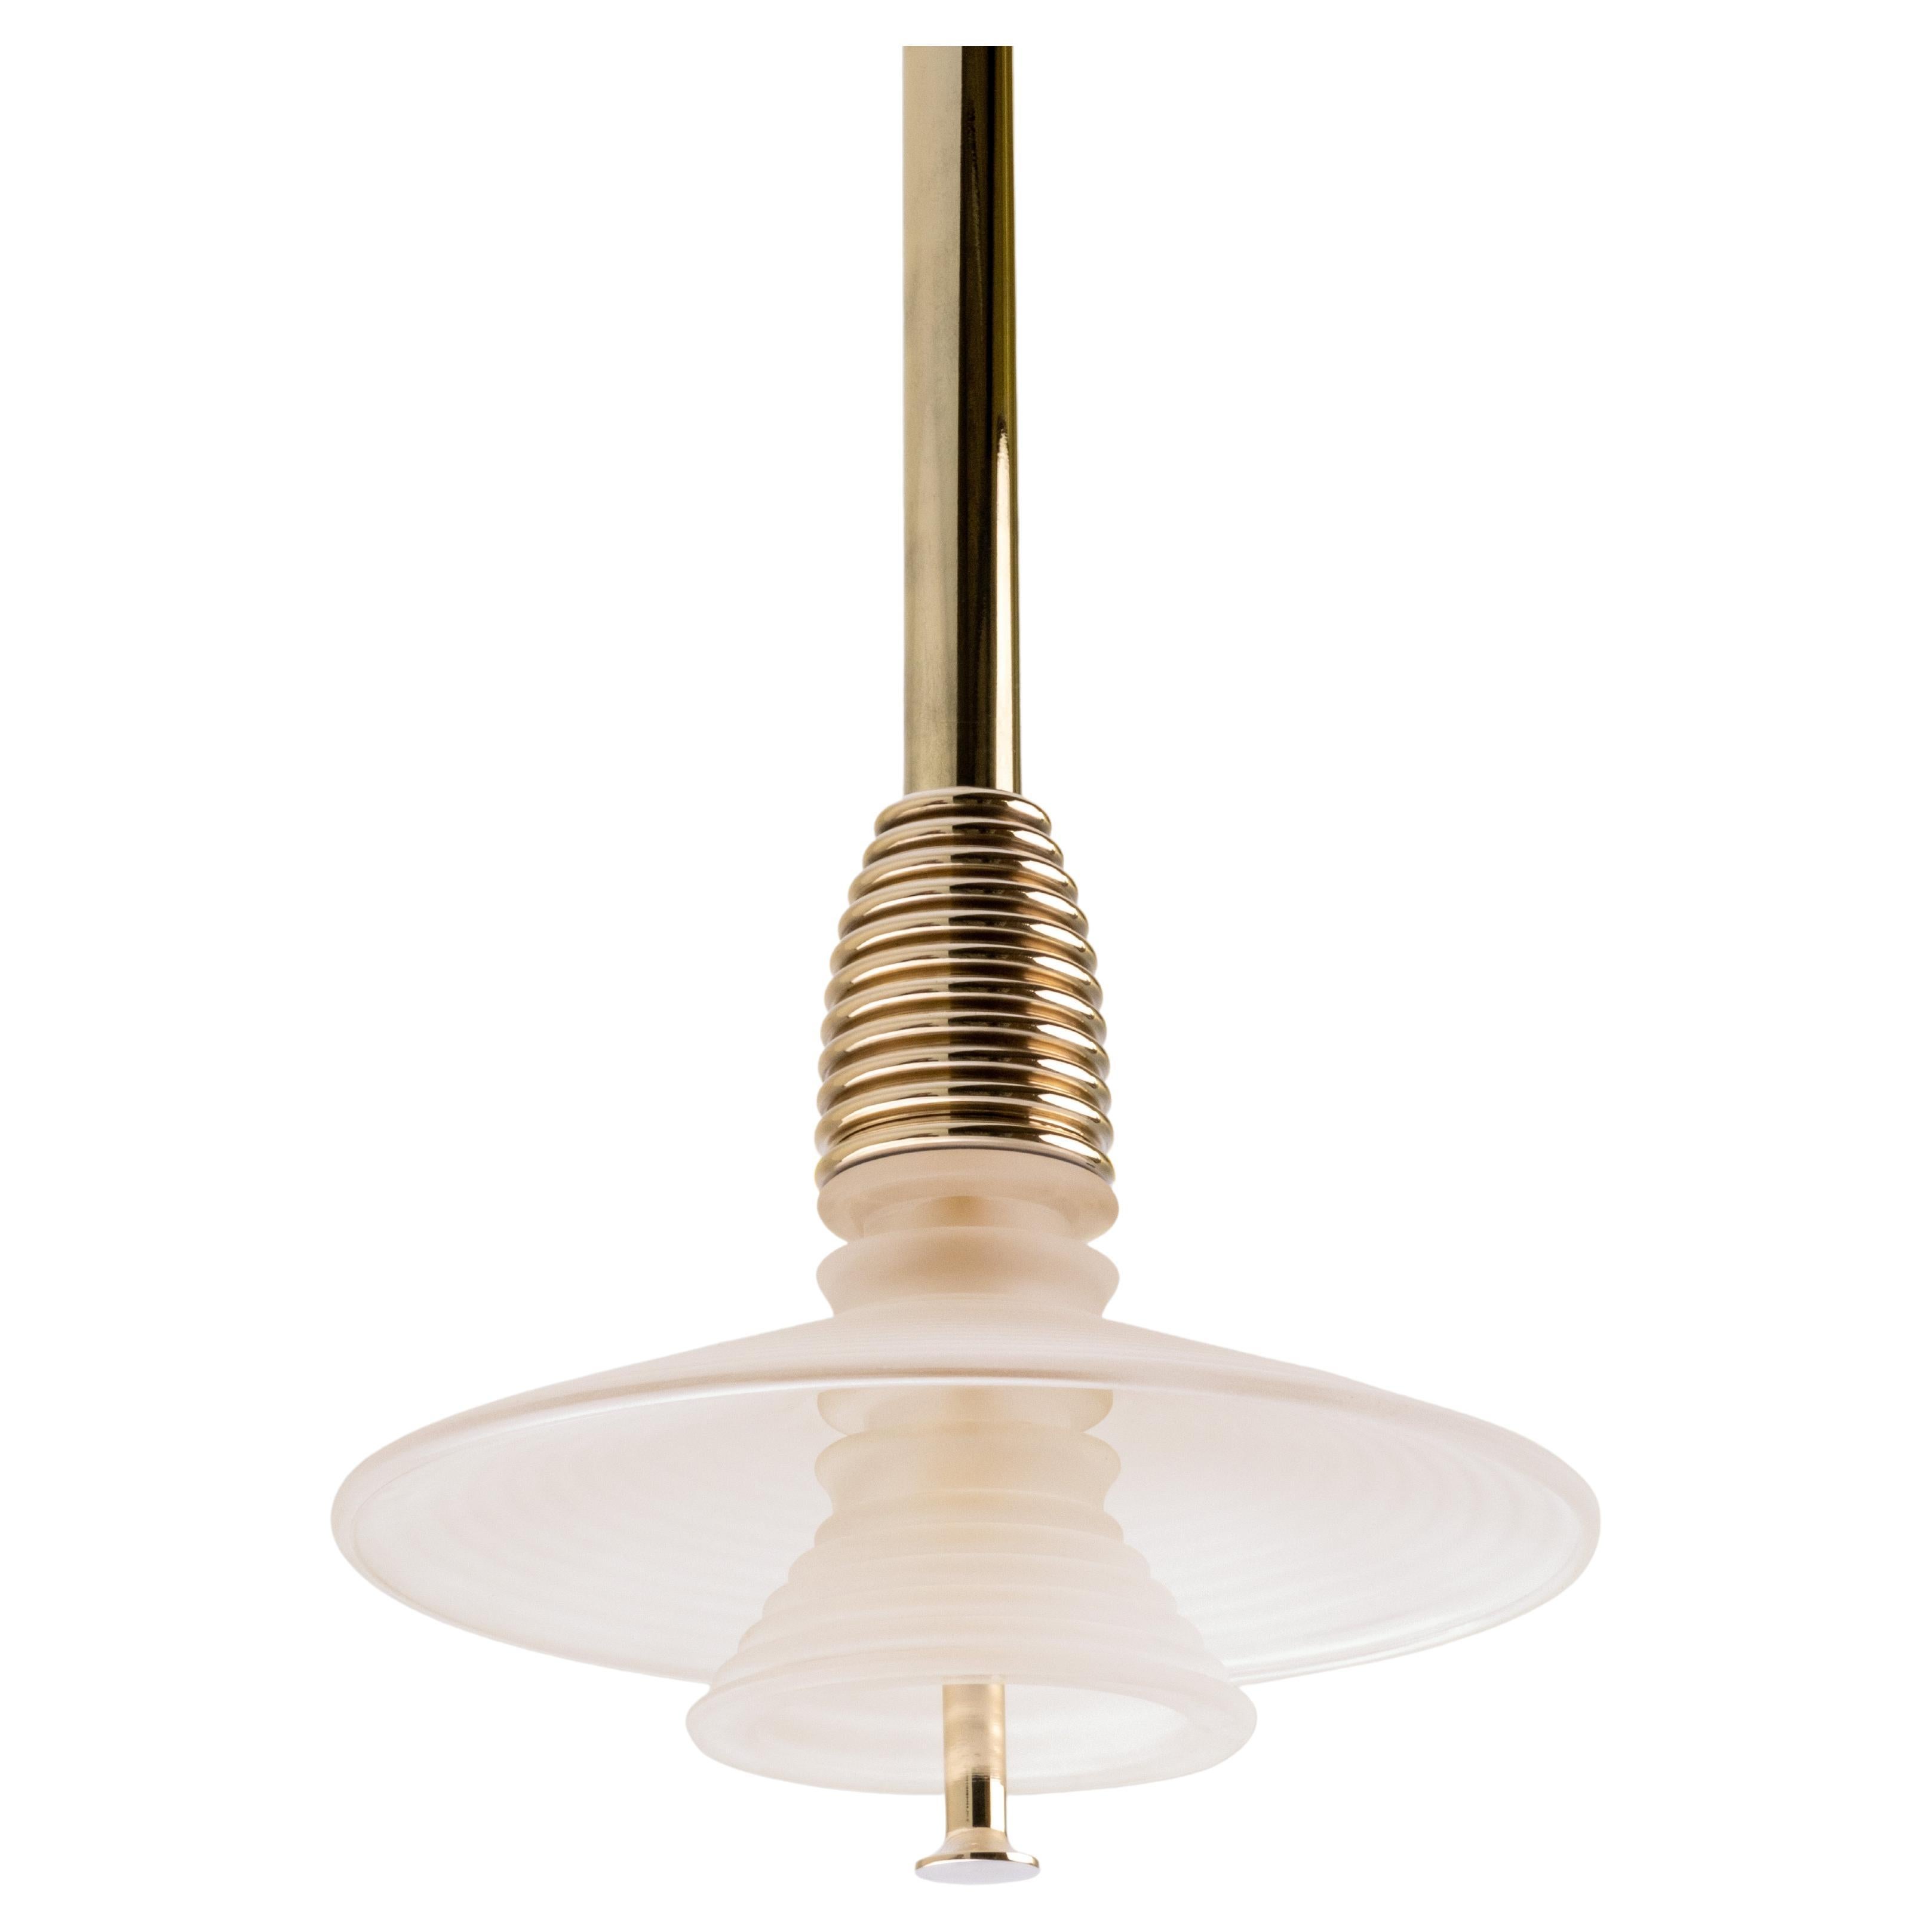 The Insulator 'AB' Pendant in polished brass and frosted glass by NOVOCASTRIAN For Sale